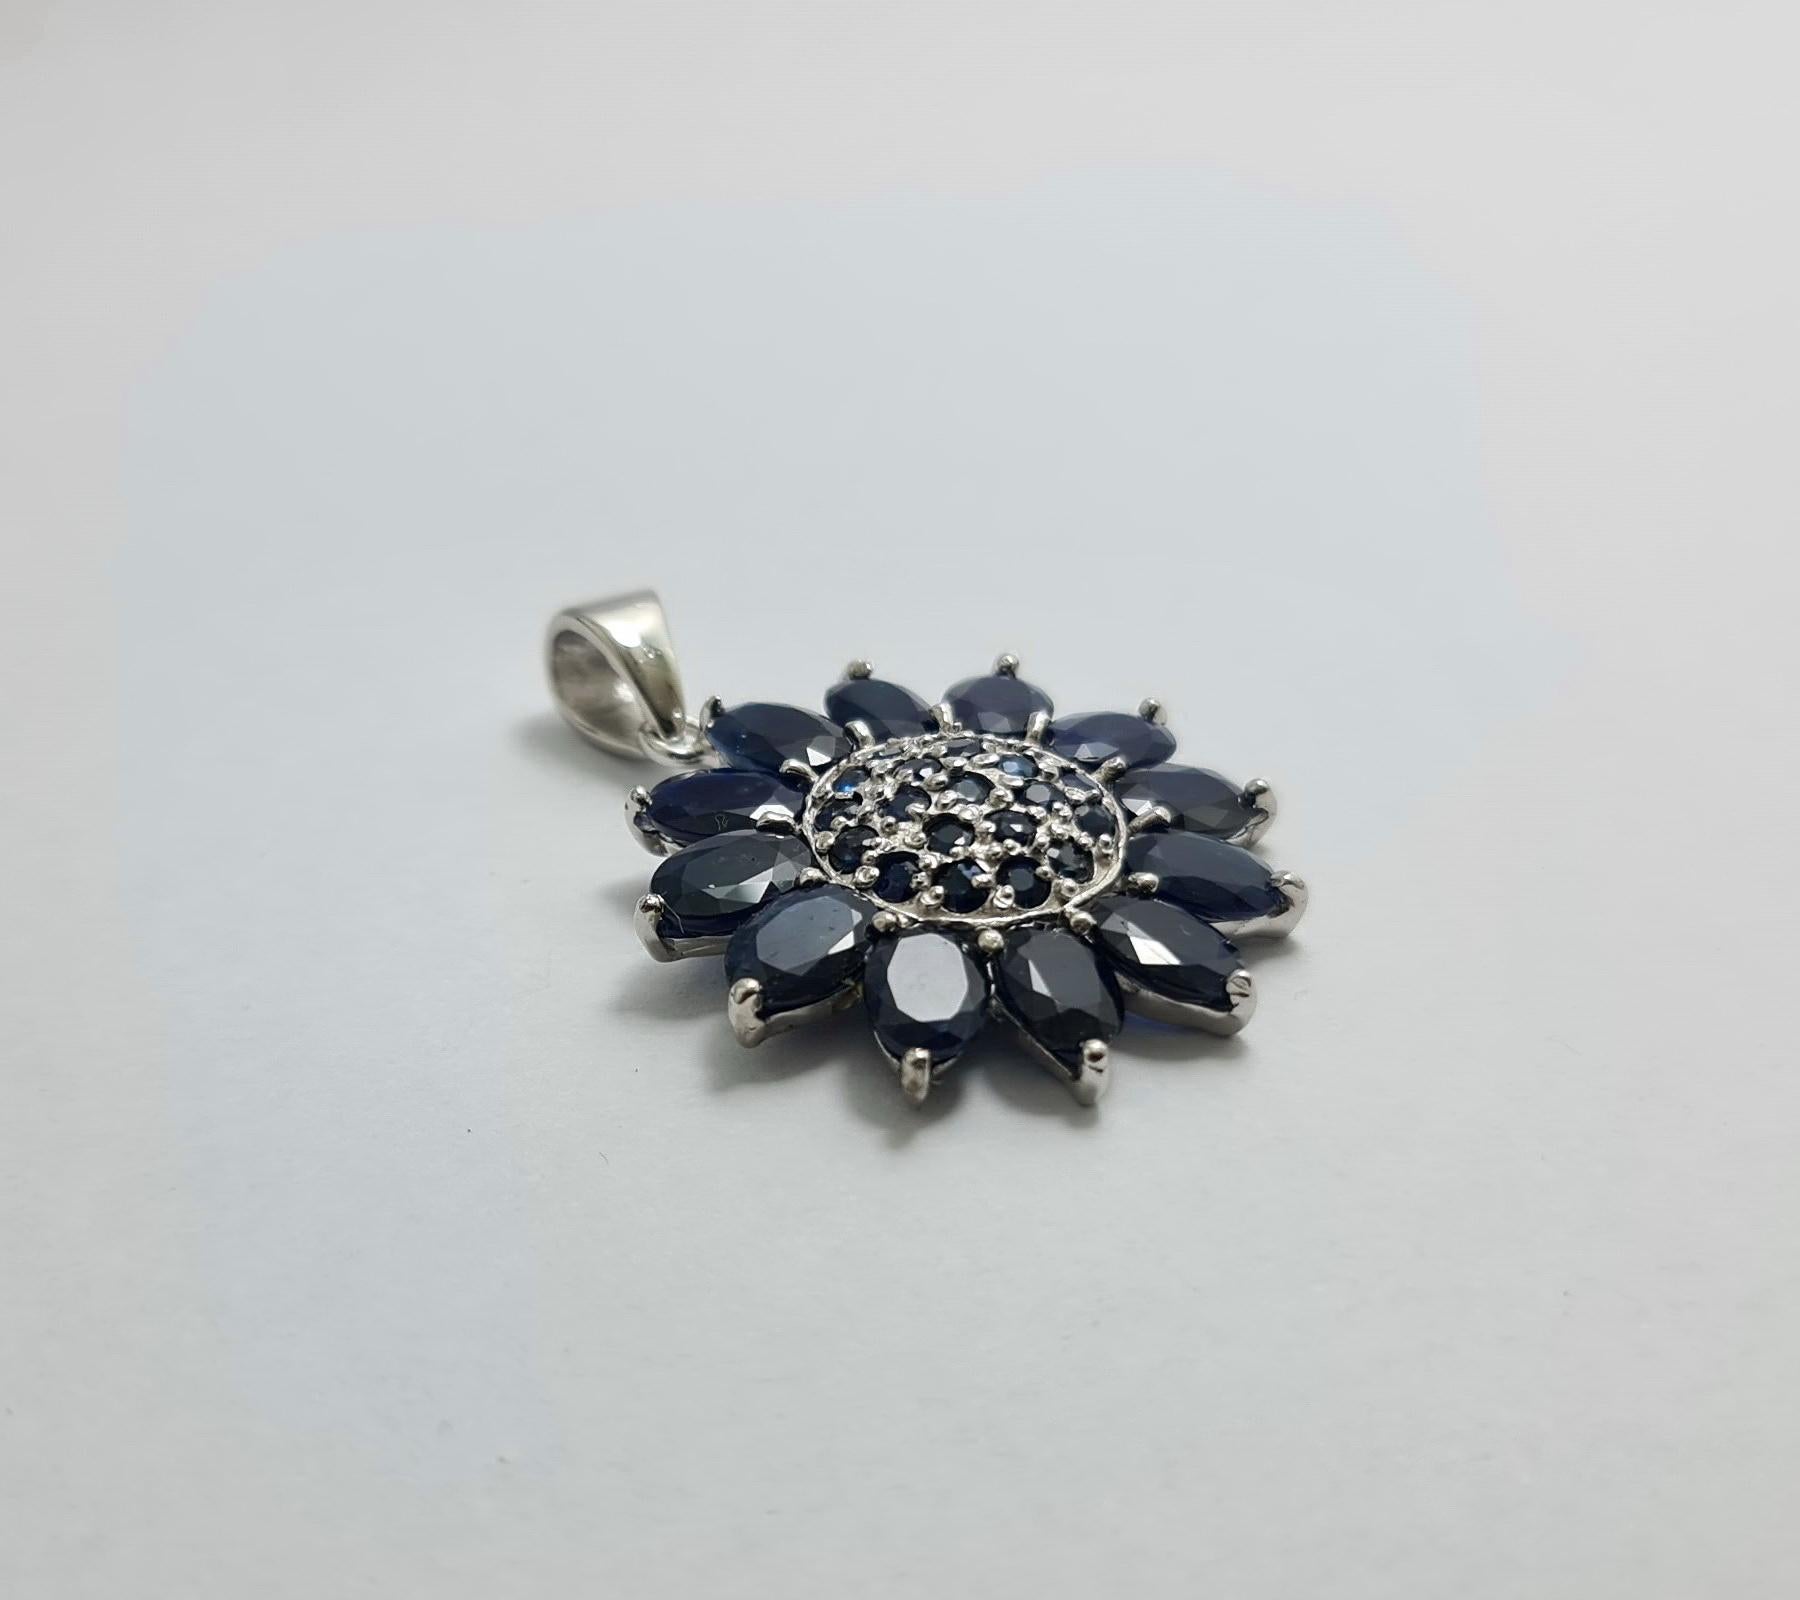 Natural Untreated Unheated Thailand Sapphires  Sunflower Pendant set in Pure .925 Sterling Silver with Rhodium Plating 

Total weight of Sapphires: 12 carats
Total weight of the pendant is 8.7 grams

Please check other listings for matching sets 